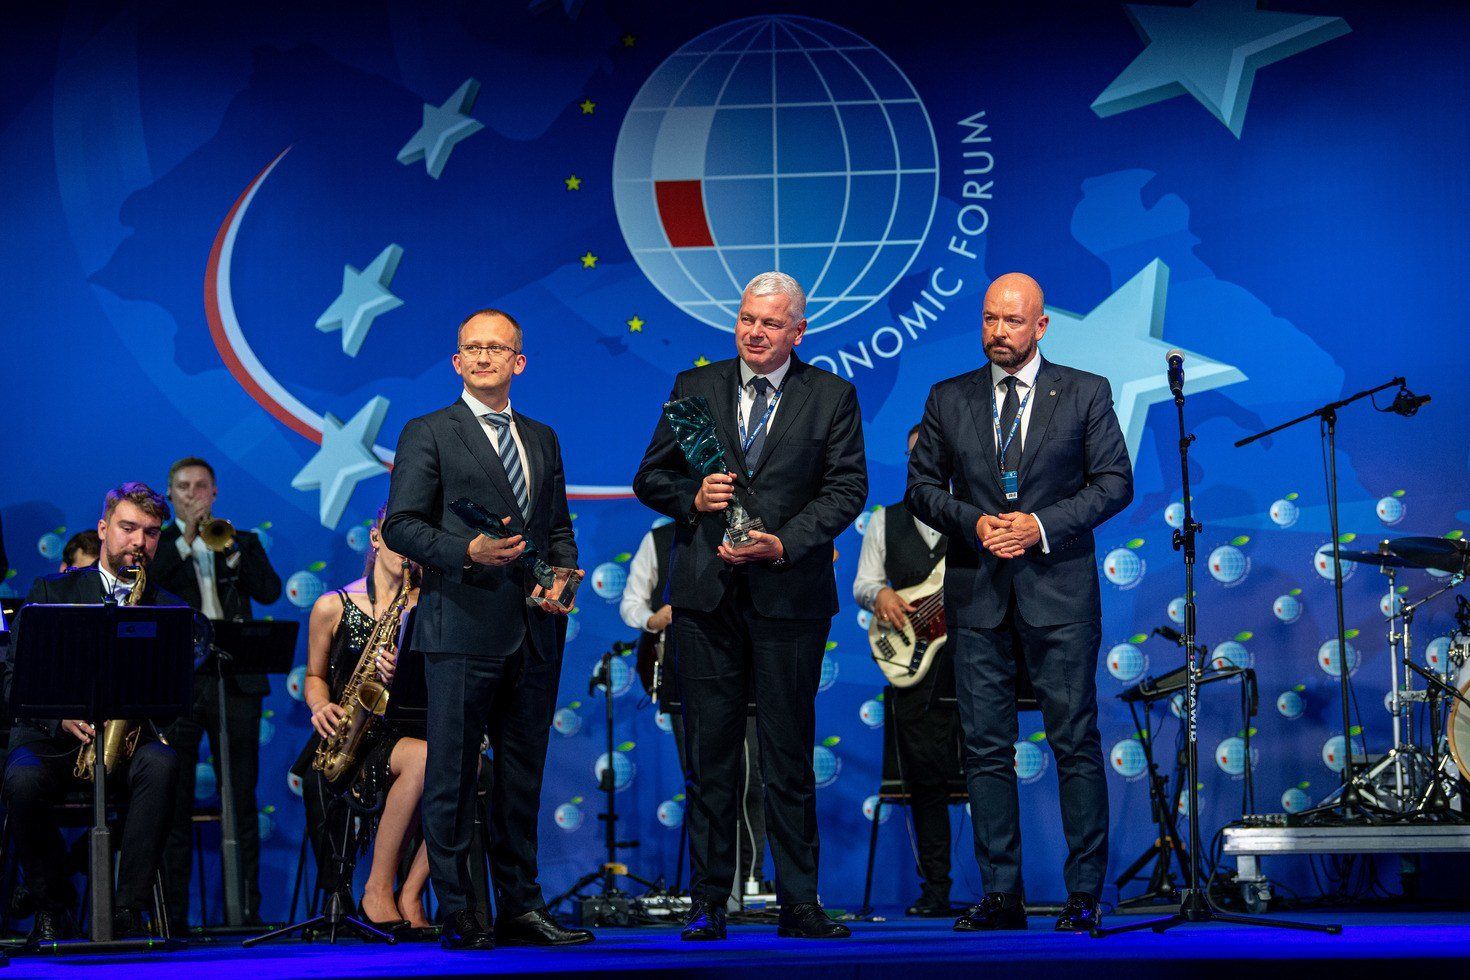 Mayor of Wroclaw awarded socially responsible companies during a gala at the Economic Forum in Karpacz